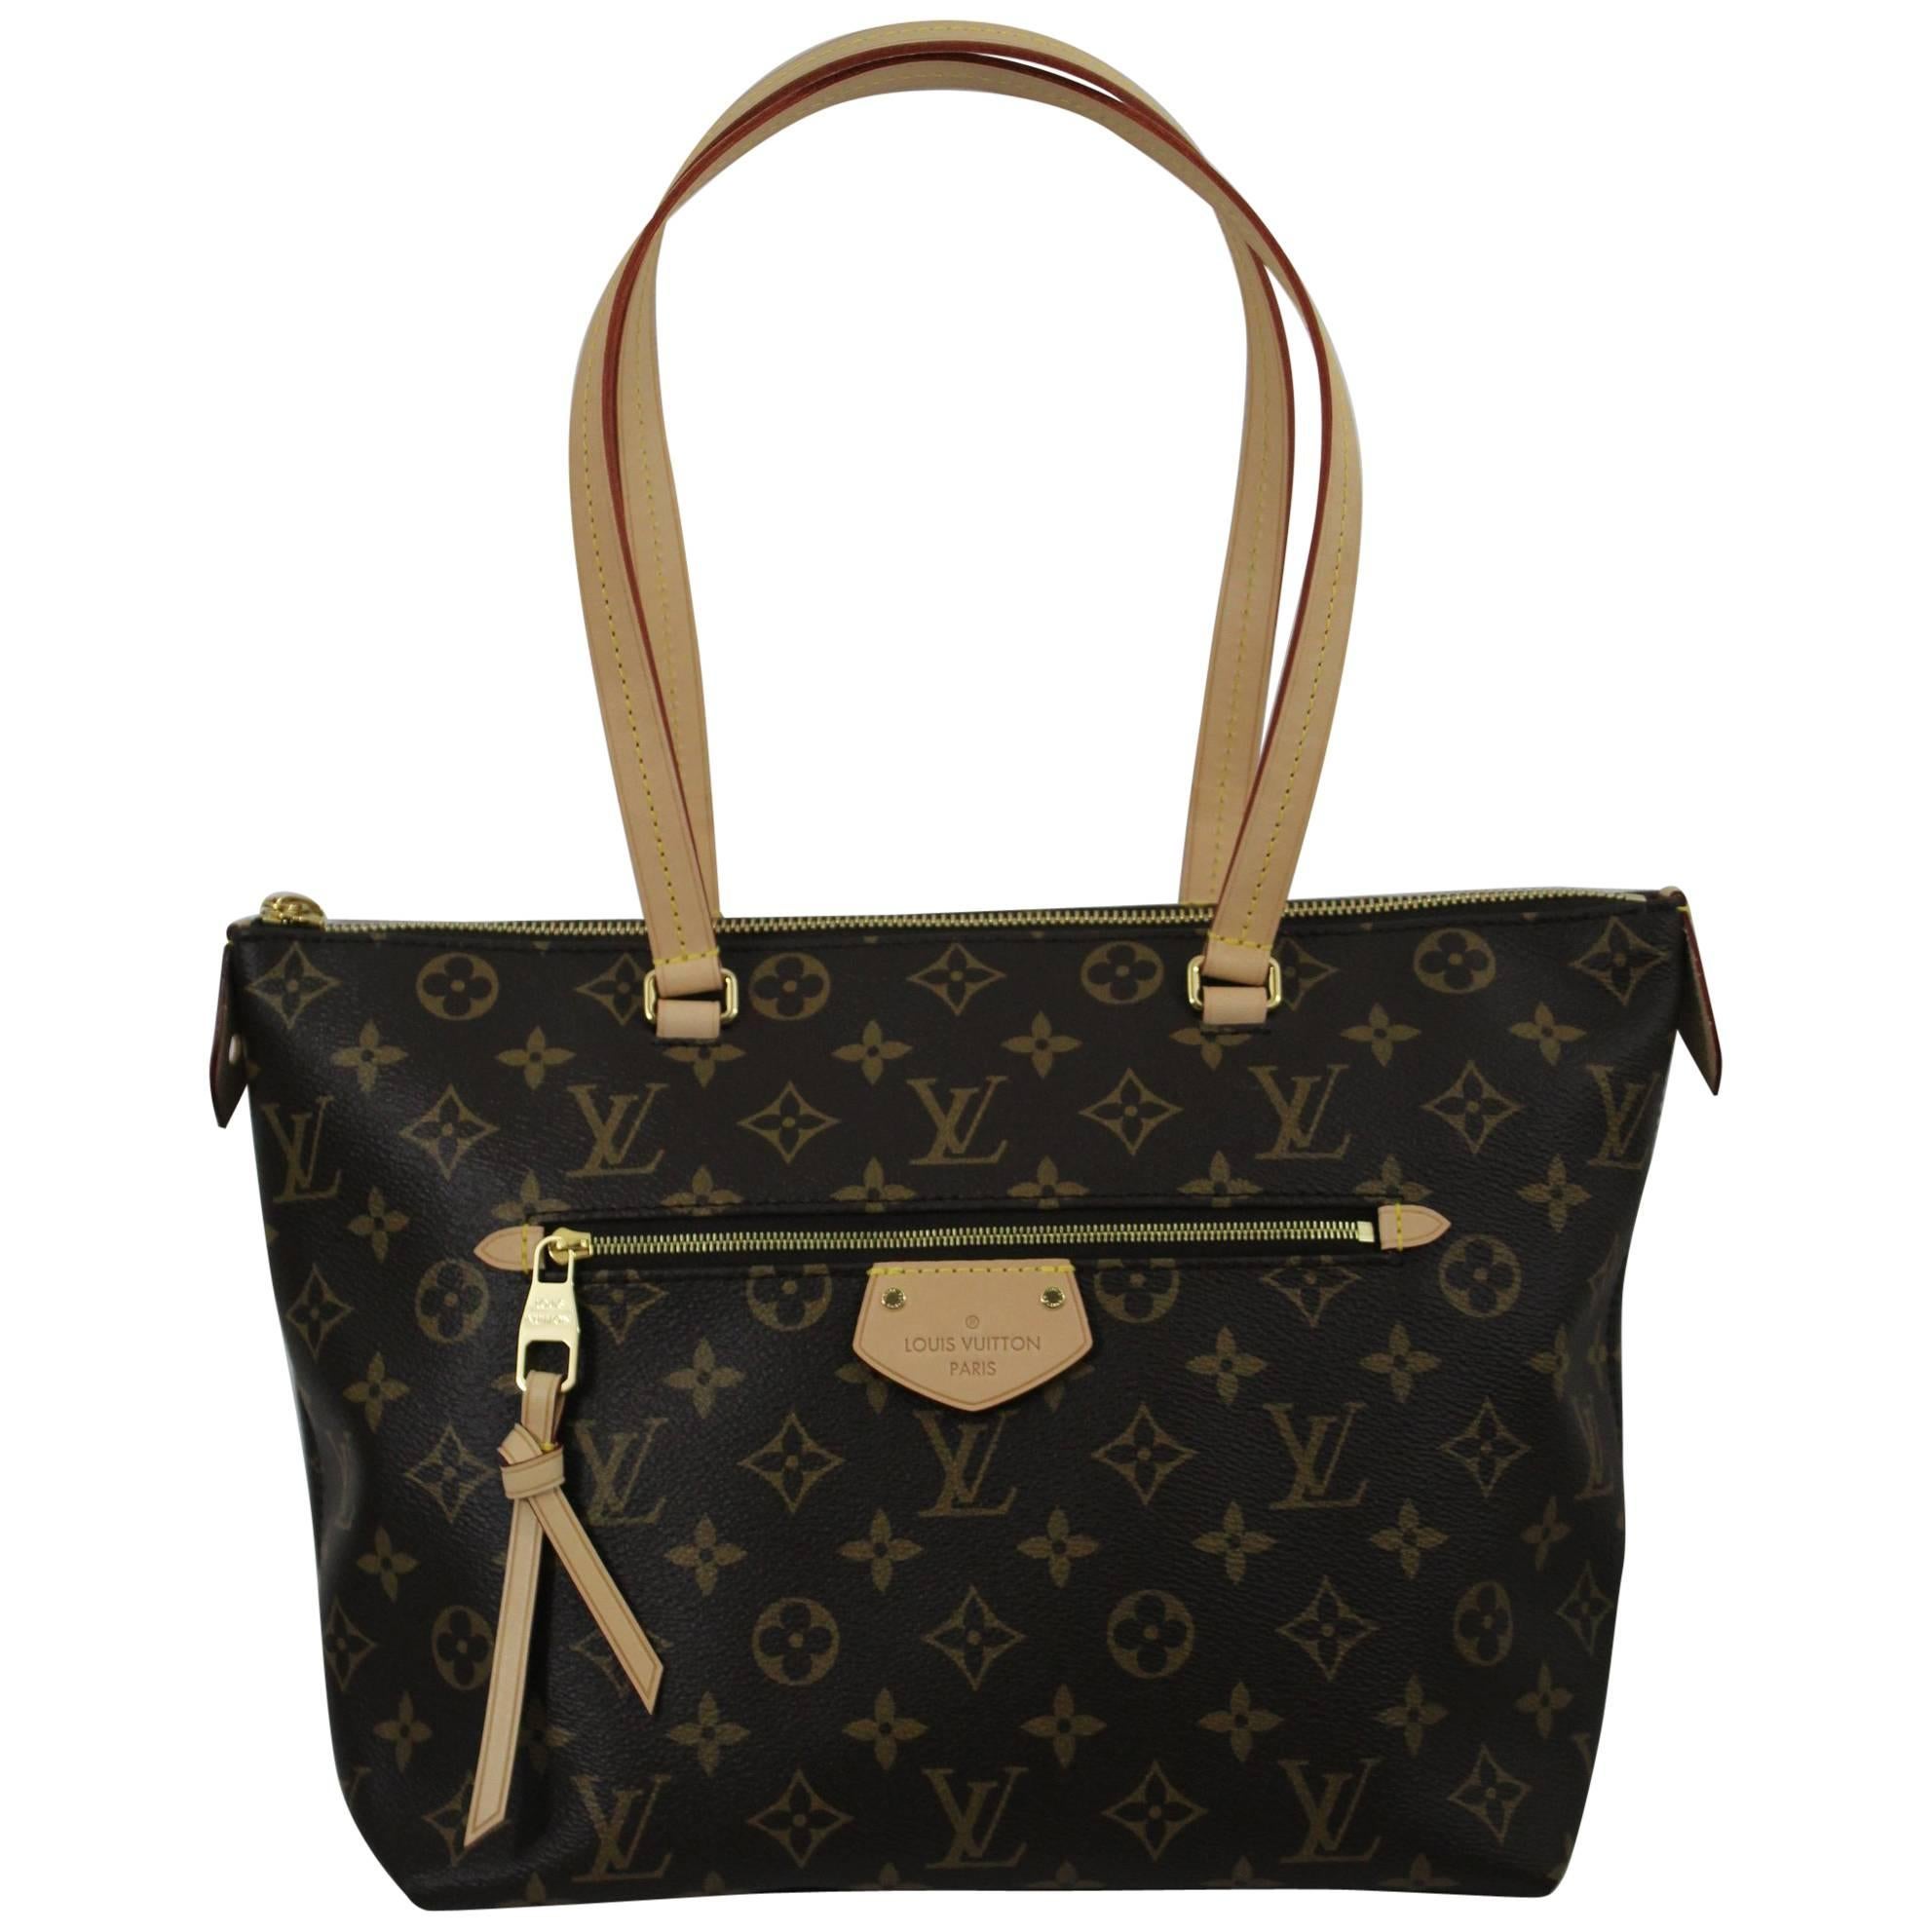 New Never Used Louis Vuitton Iena Bag PM